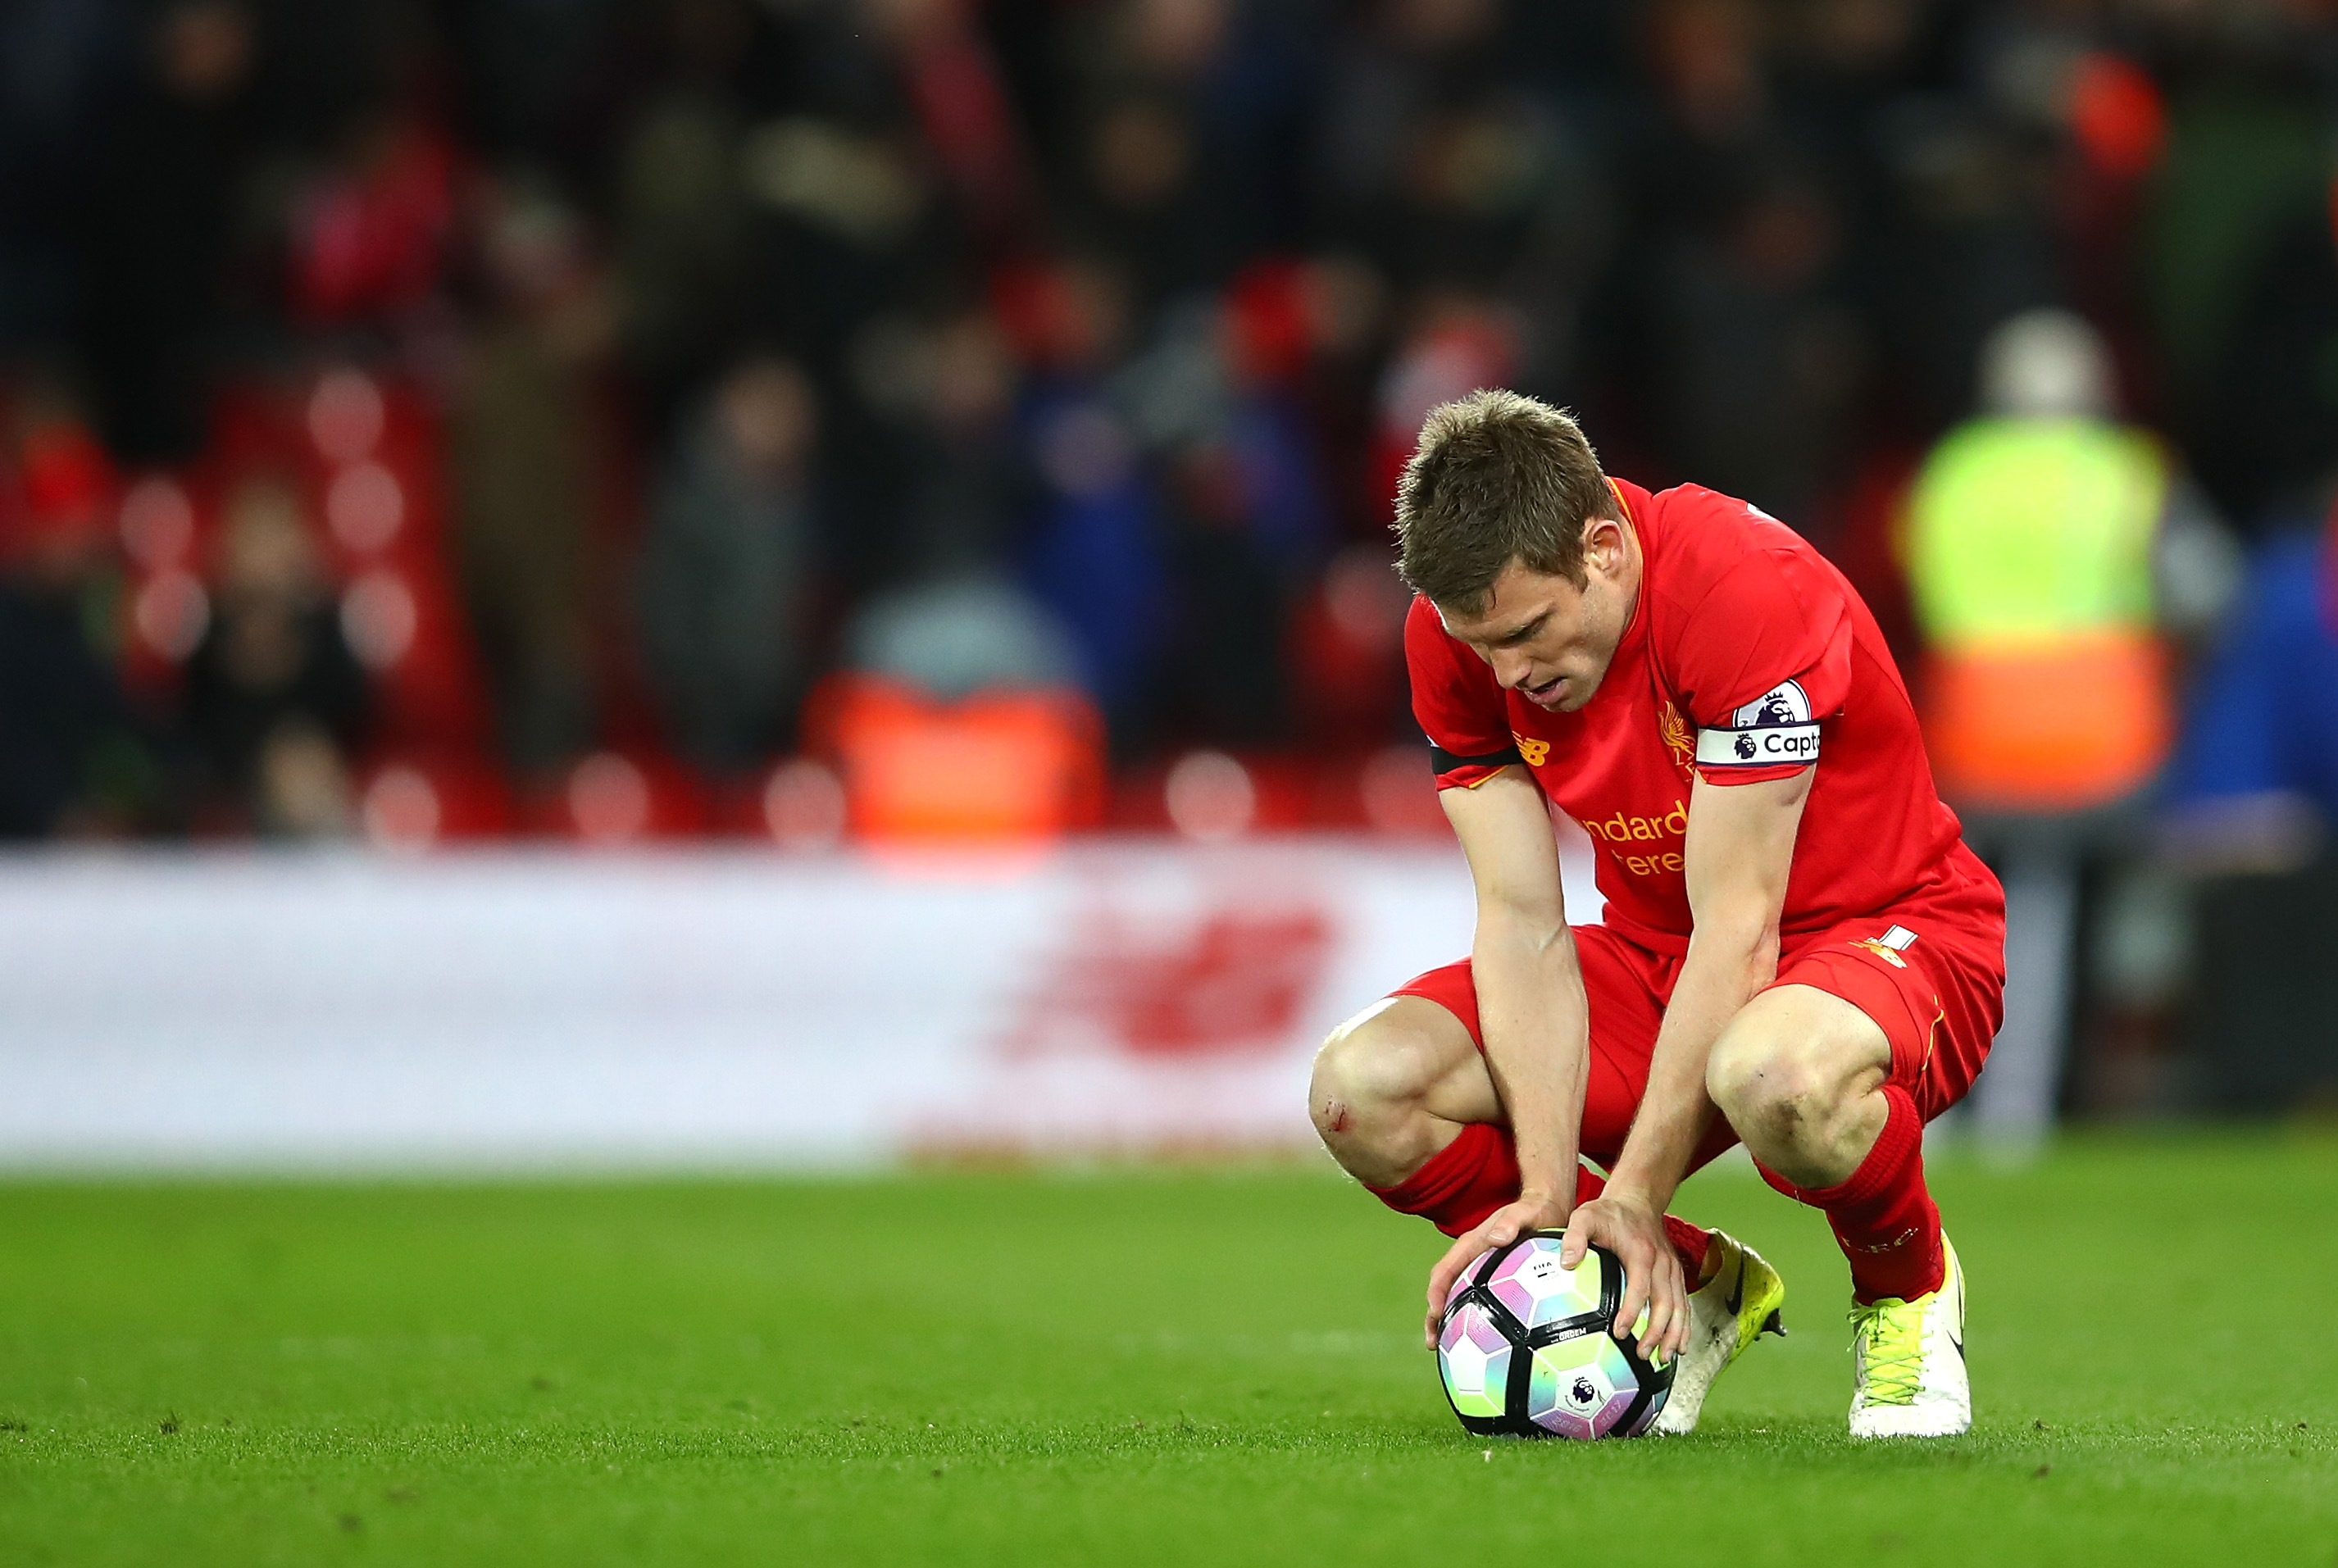 LIVERPOOL, ENGLAND - APRIL 05: James Milner of Liverpool looks dejected after the Premier League match between Liverpool and AFC Bournemouth at Anfield on April 5, 2017 in Liverpool, England.  (Photo by Clive Brunskill/Getty Images)